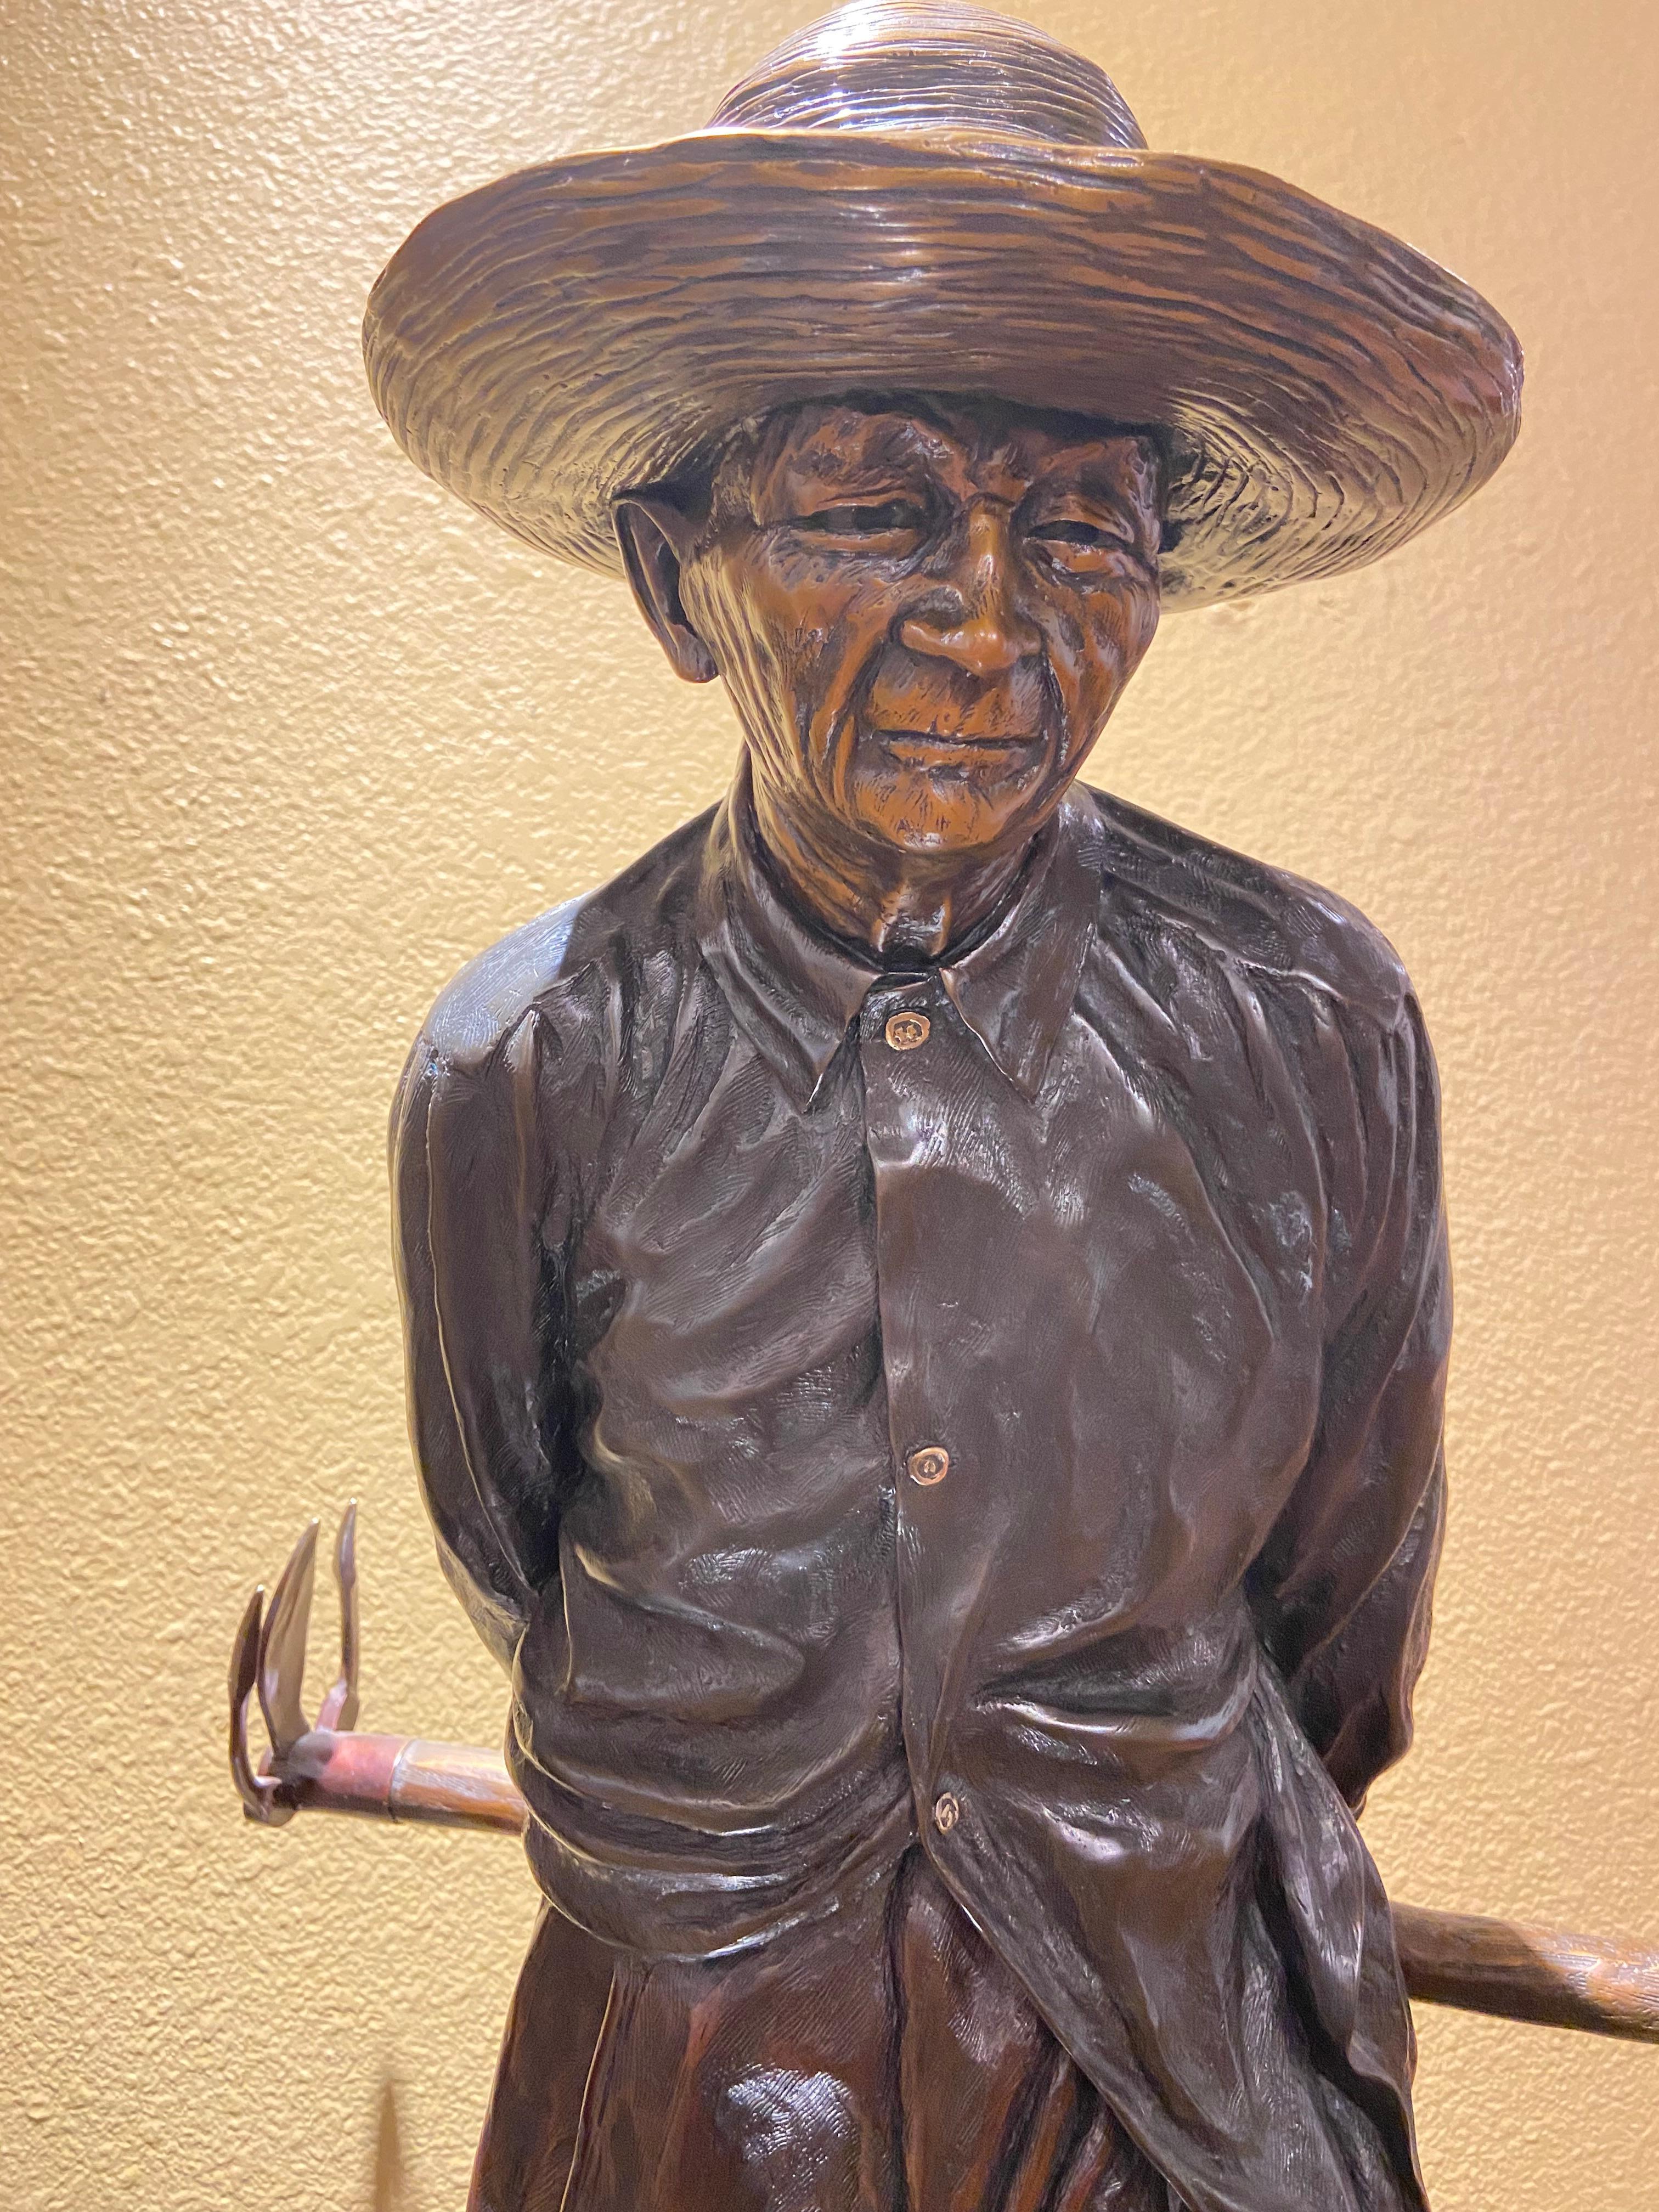 Farmer Han and the Farmer's Wife - American Realist Sculpture by Dee Clements